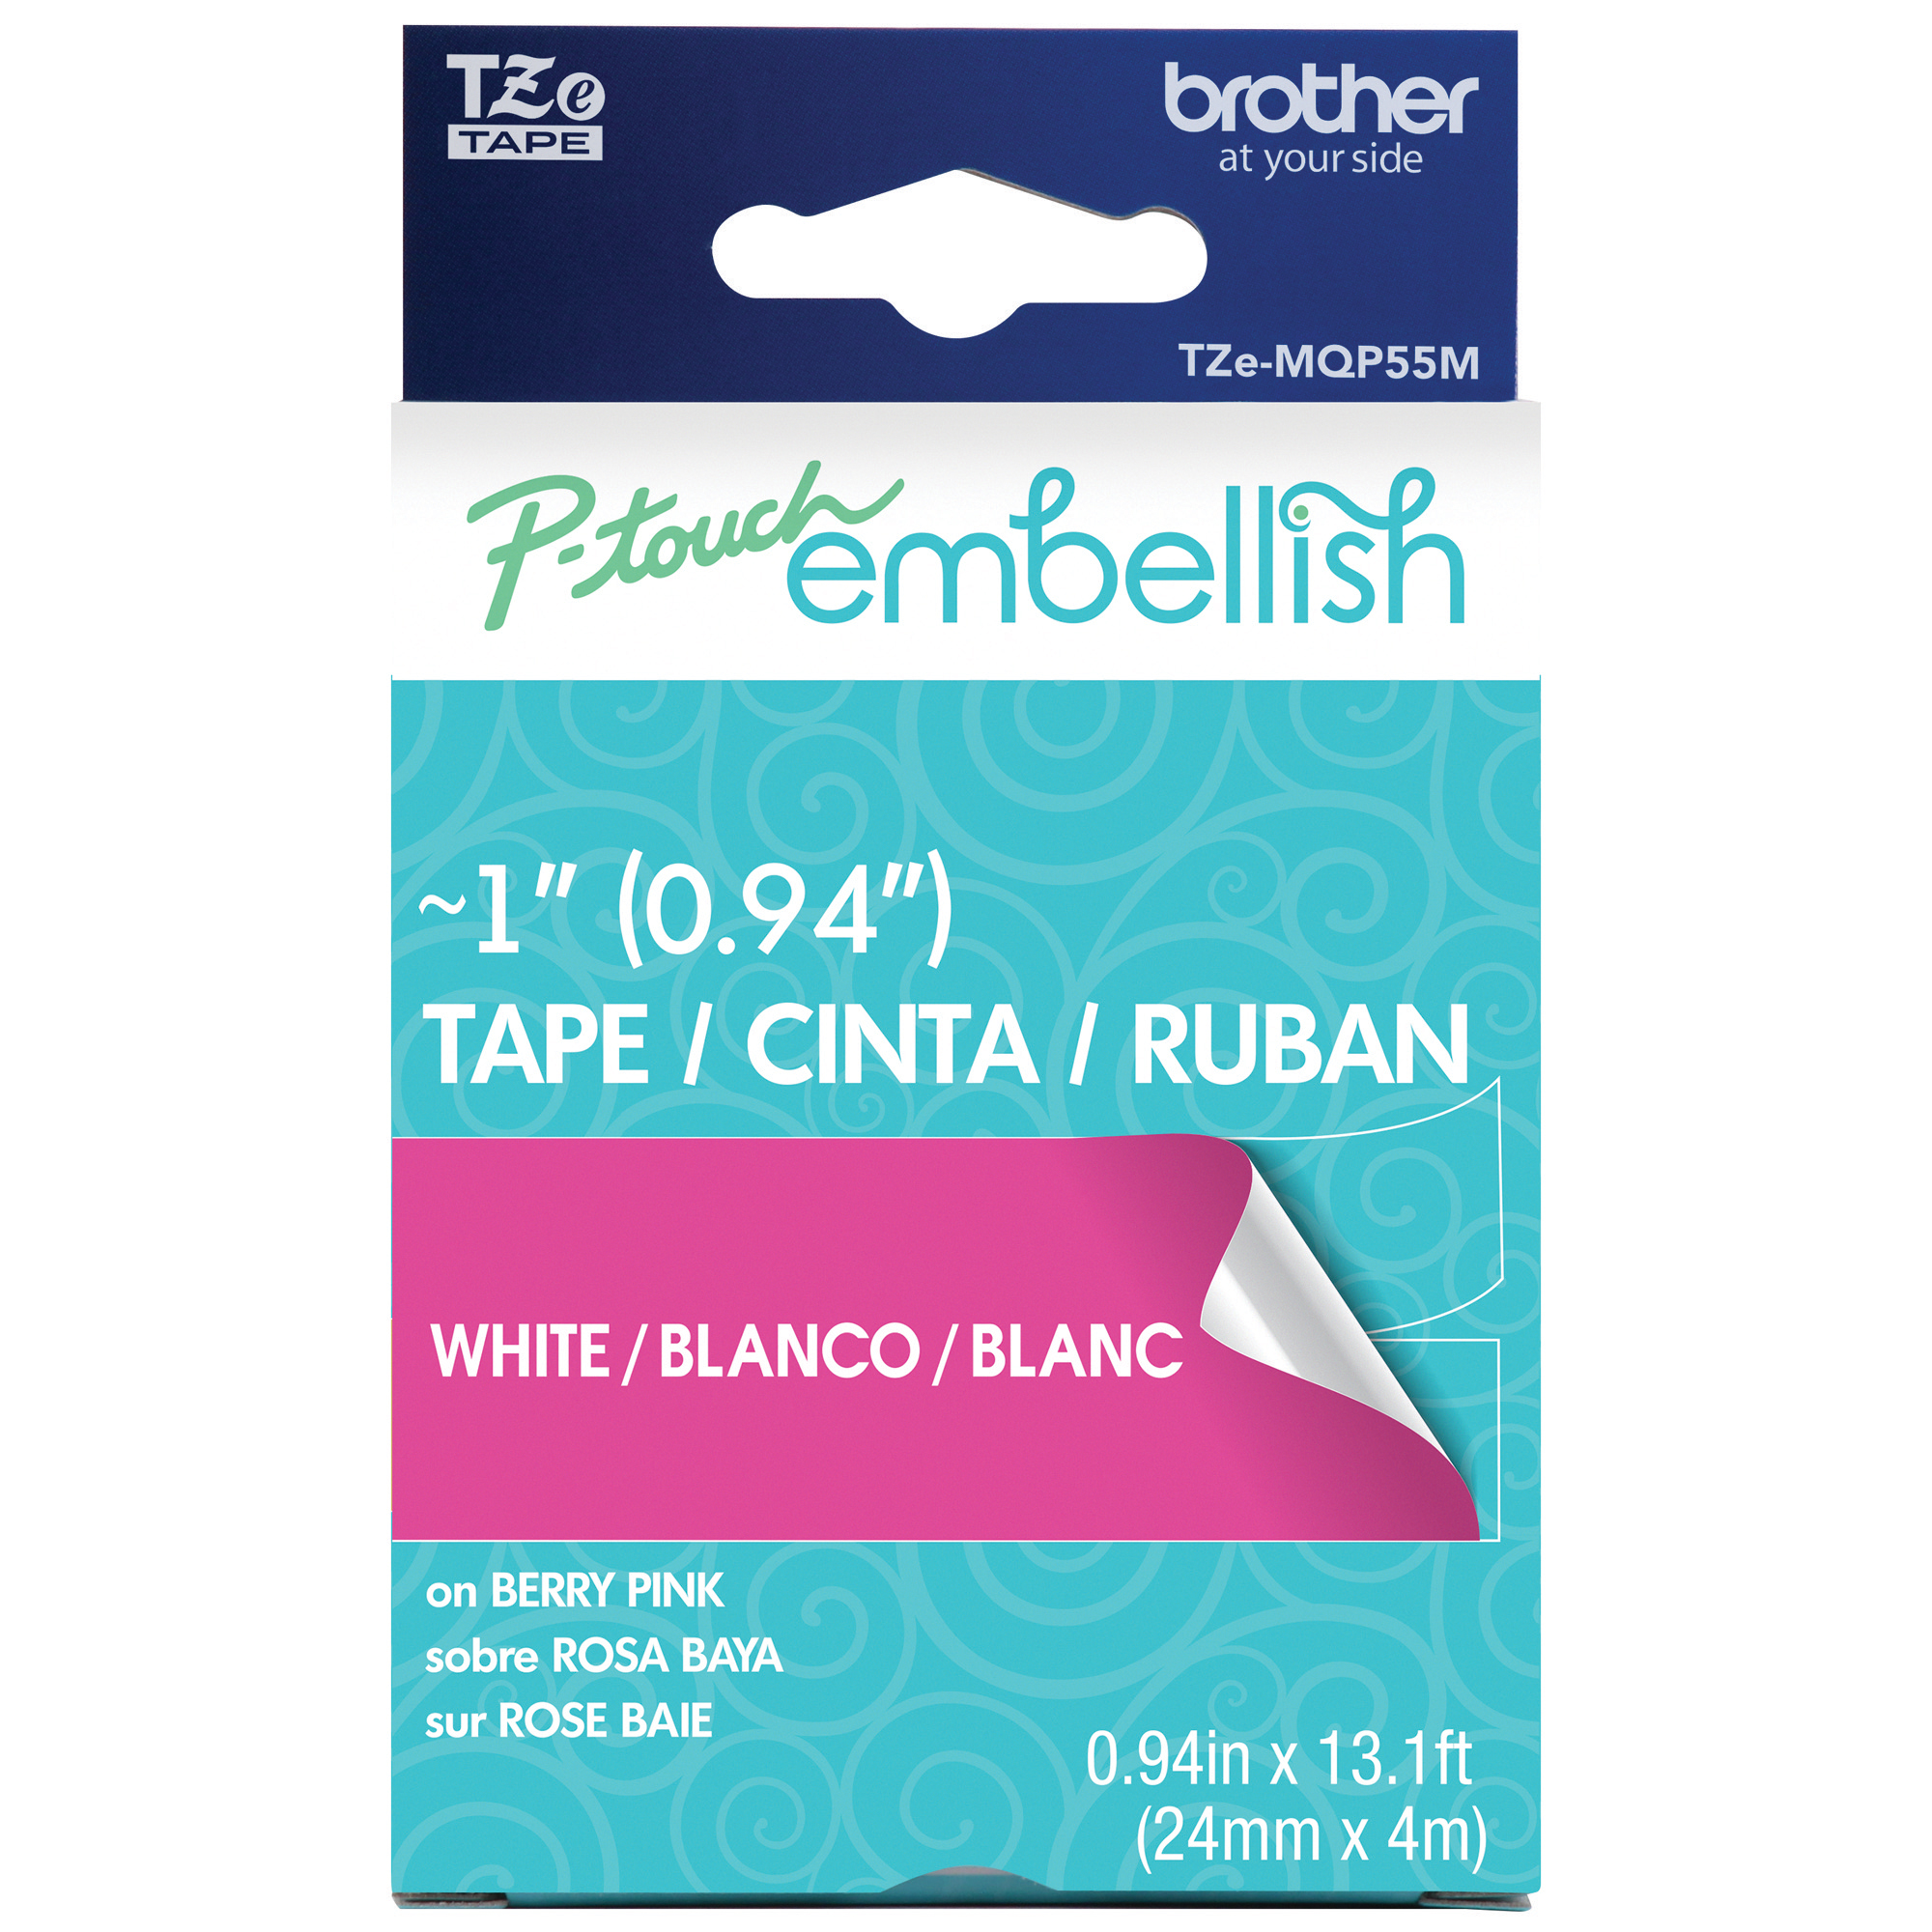 

Brother P-Touch Embellish White Print on Berry Pink Laminated Tape ~1" (24mm) x 13.1’ (4m)